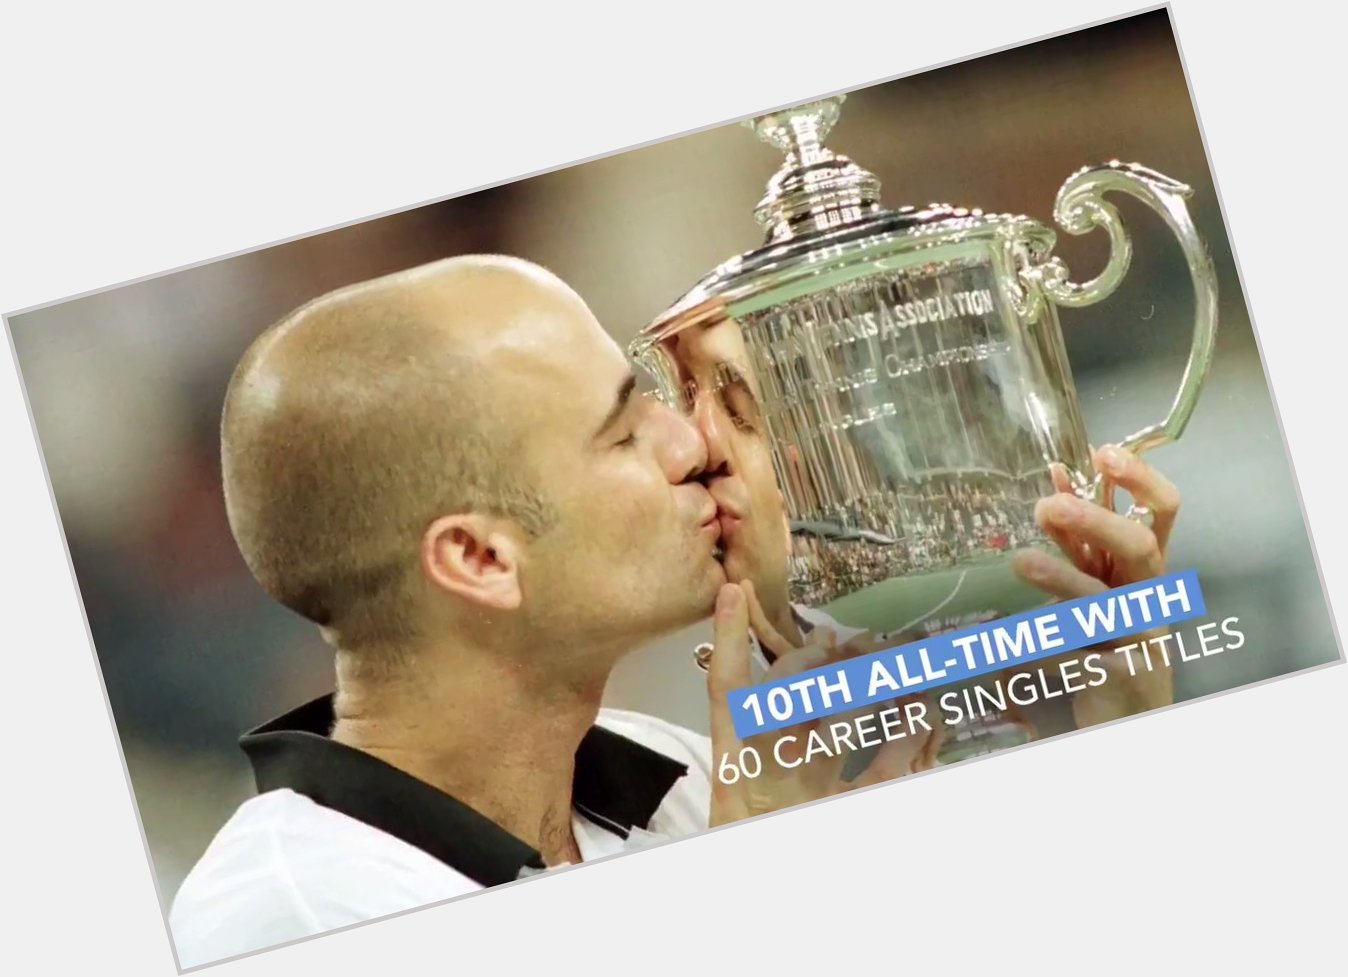 Andre Agassi\s 50th birthday is a great opportunity to look back on his remarkable career.

Happy birthday, Andre! 